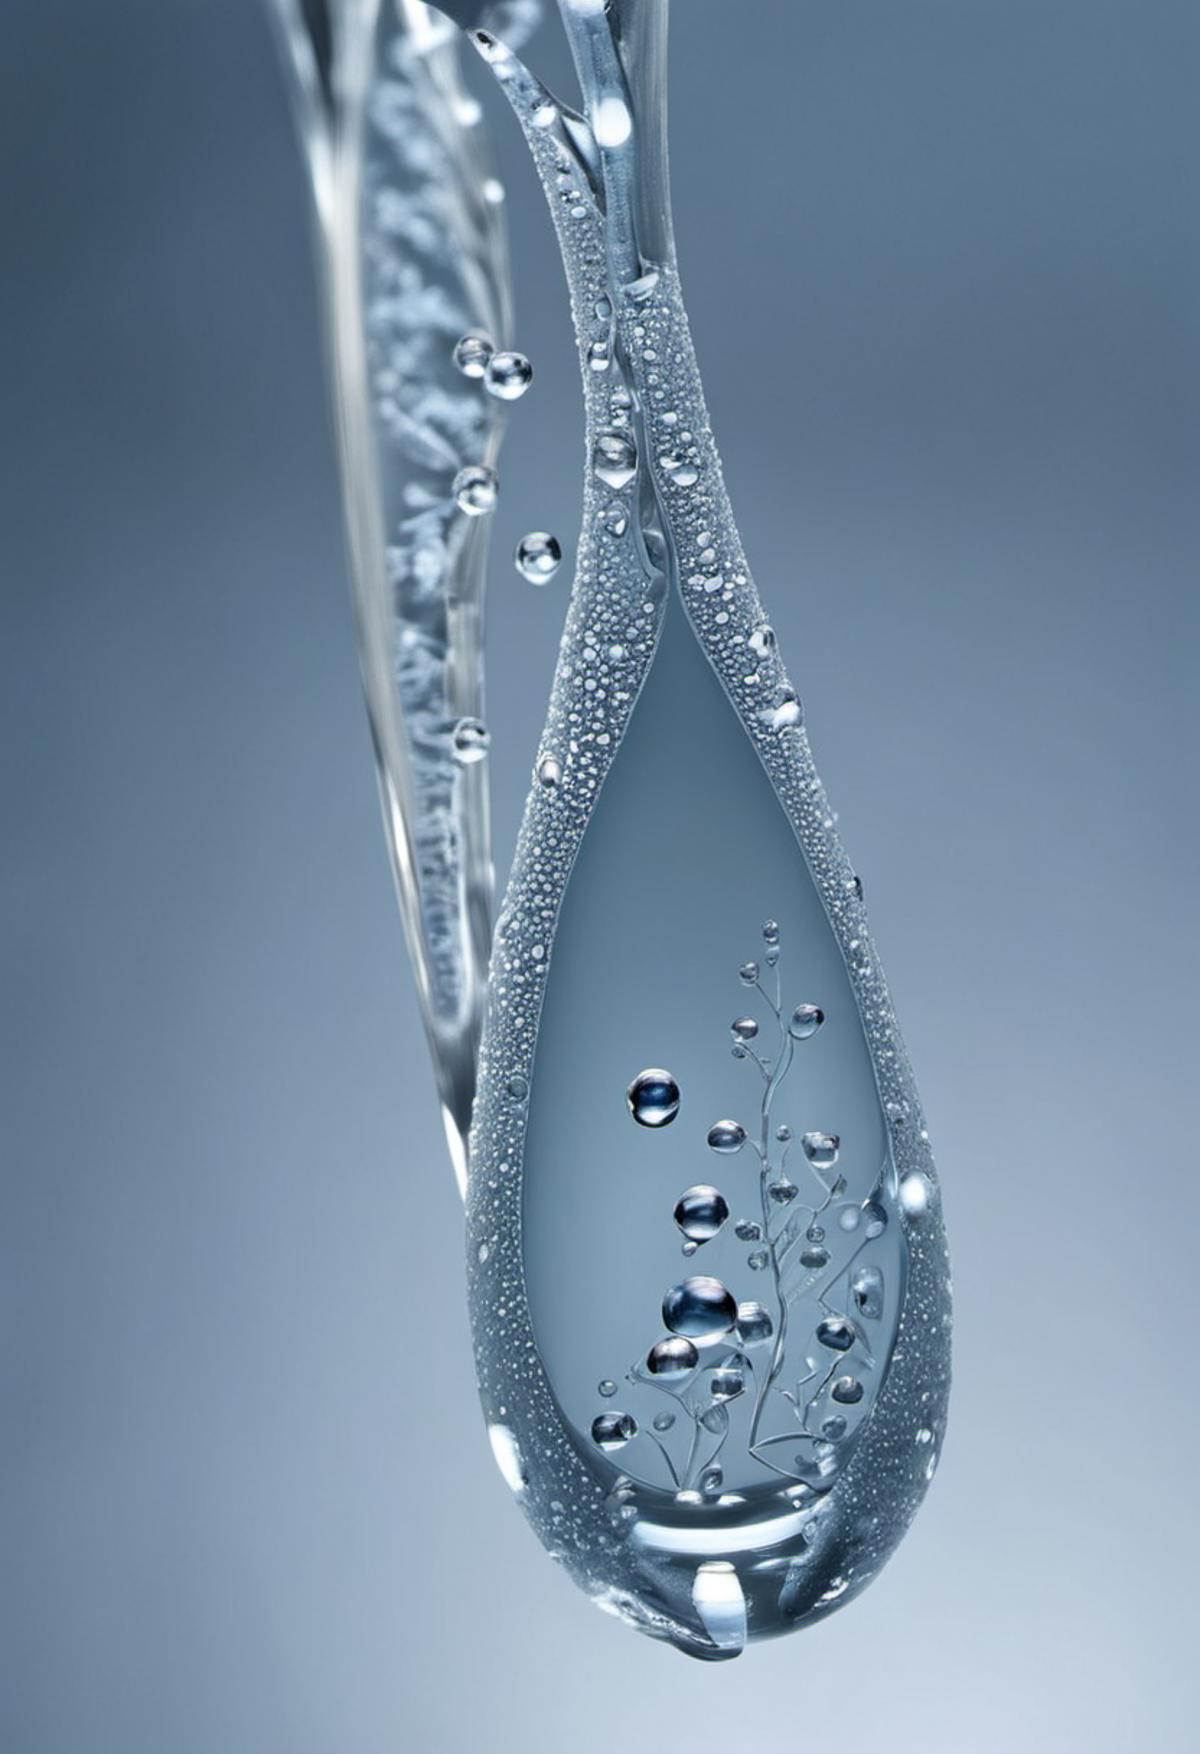 A closeup of a single drop of water with condensation and tiny bubbles.